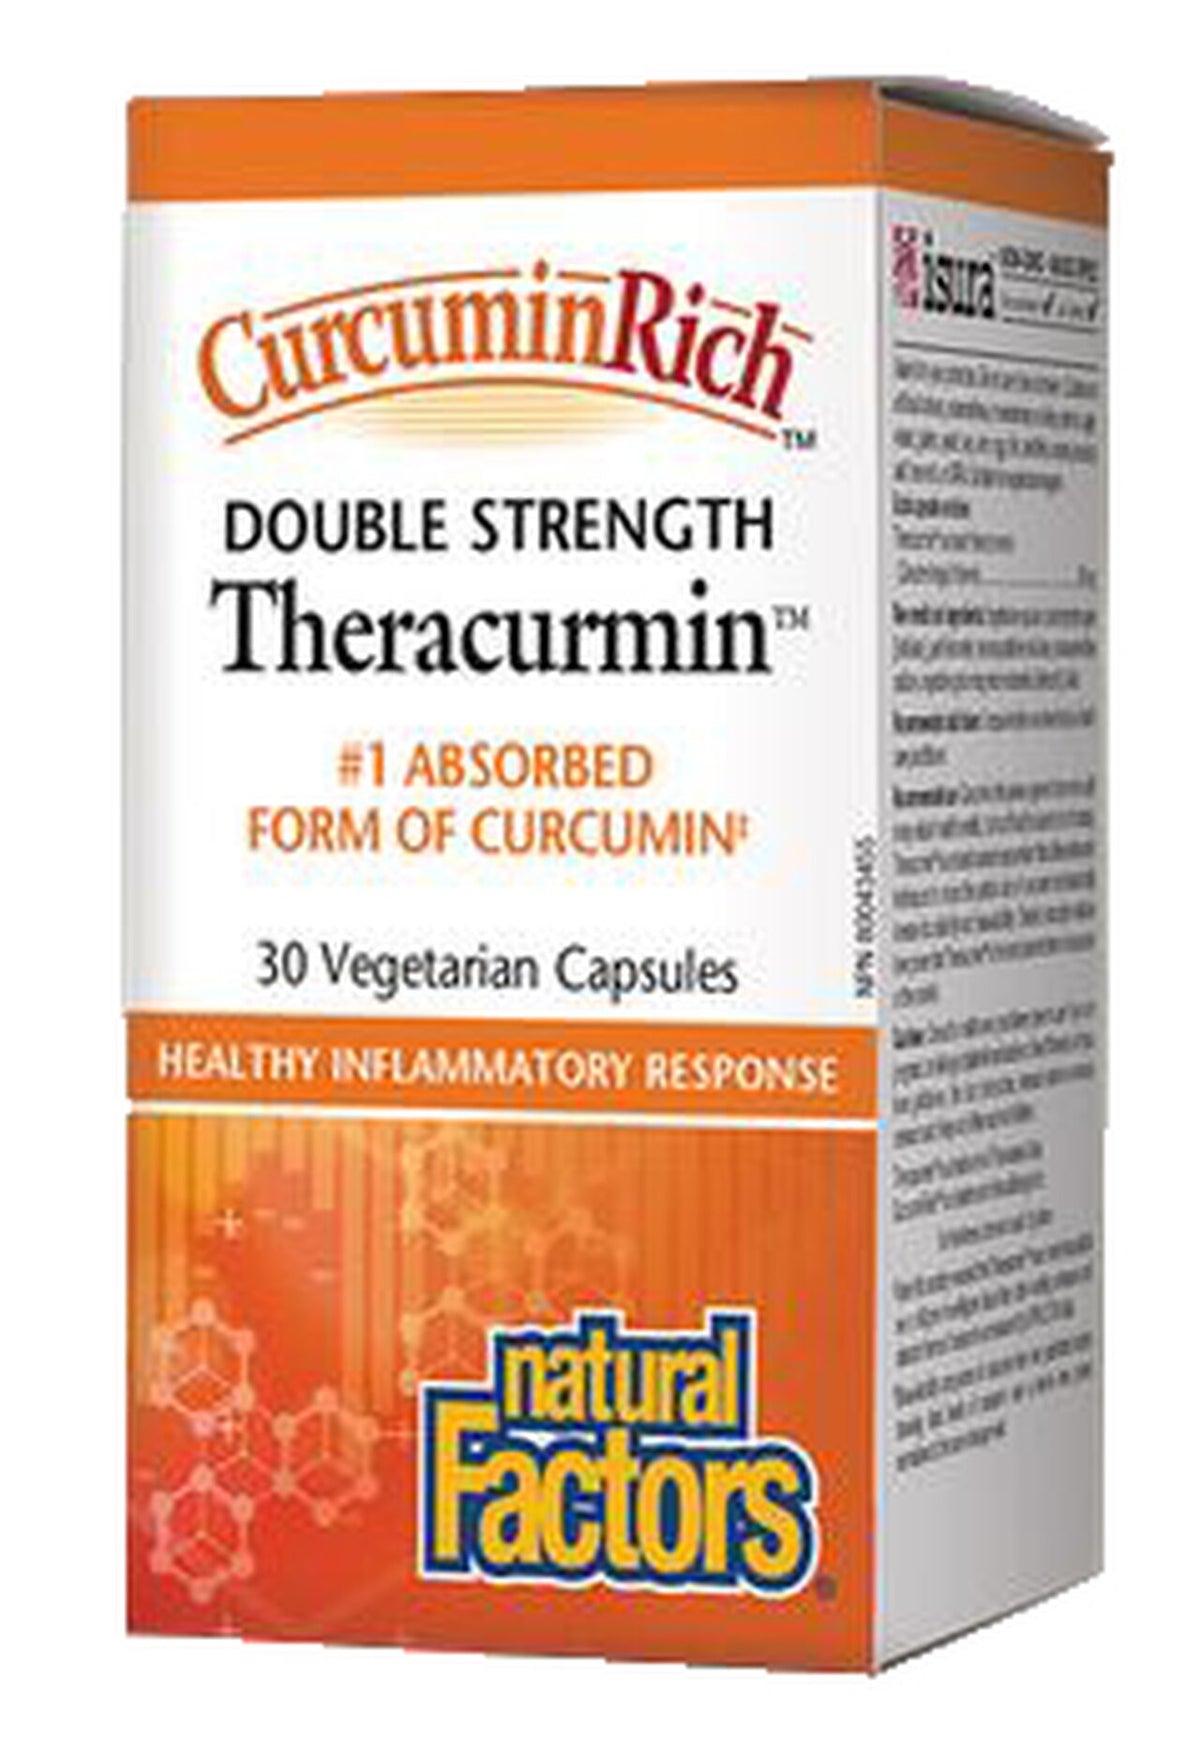 Theracurmin #1 Absorbed Form of Curcumin - 30 Capsules